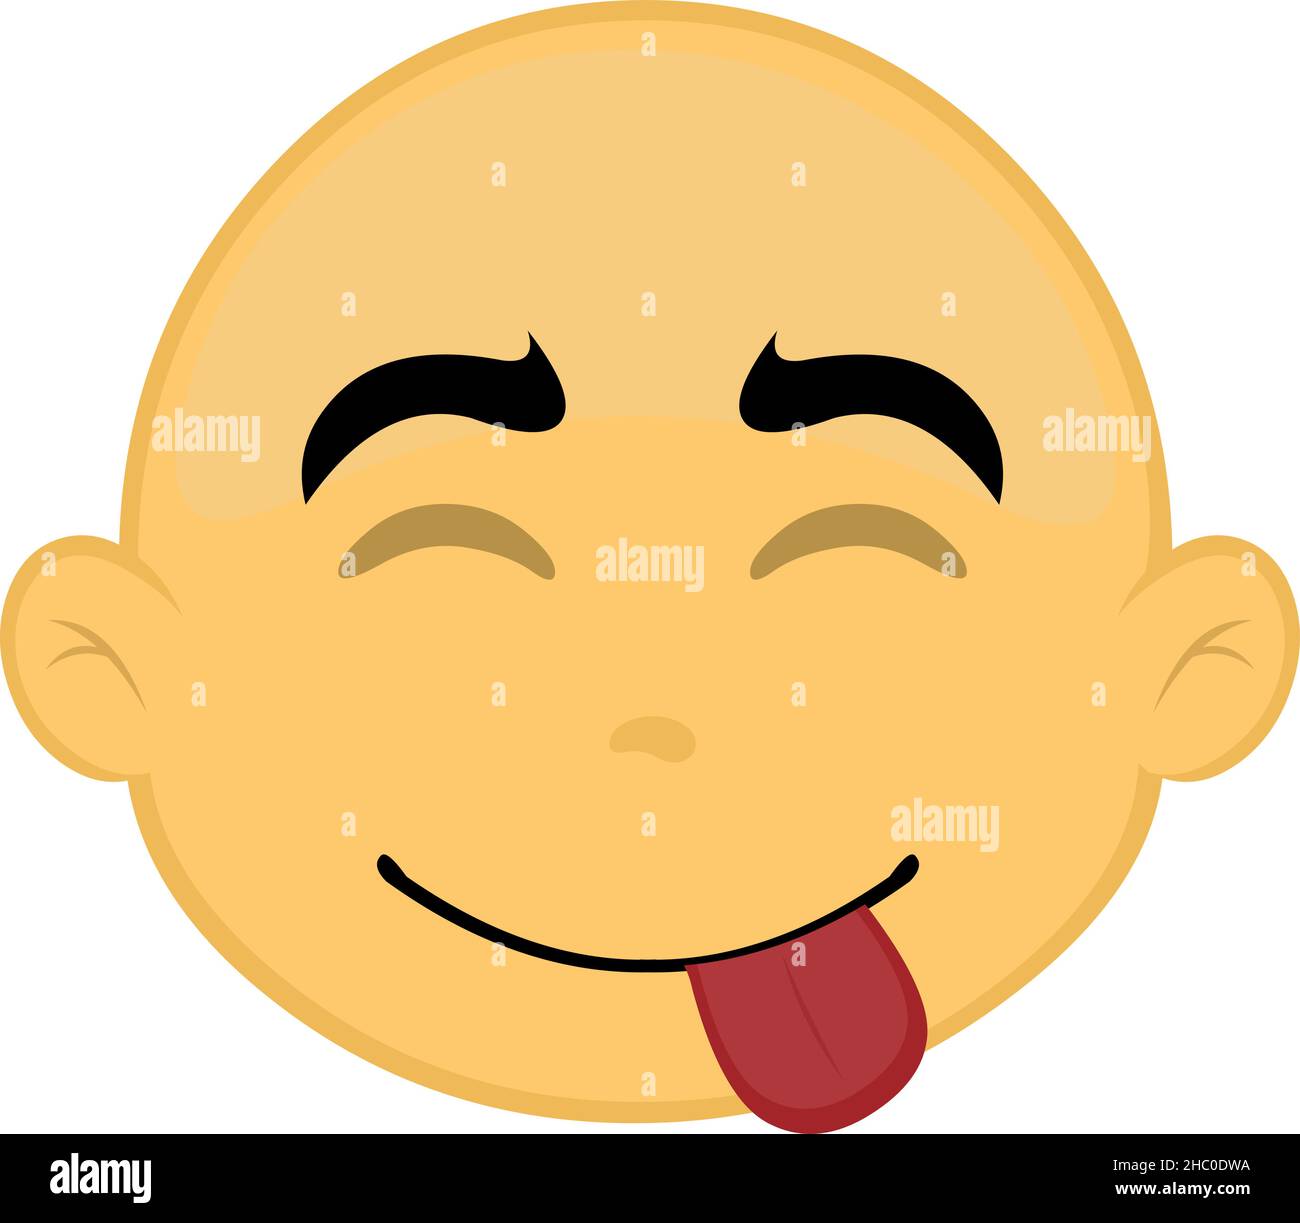 Vector illustration of the face of a cartoon character, yellow and bald, with a yummy expression that is delicious Stock Vector